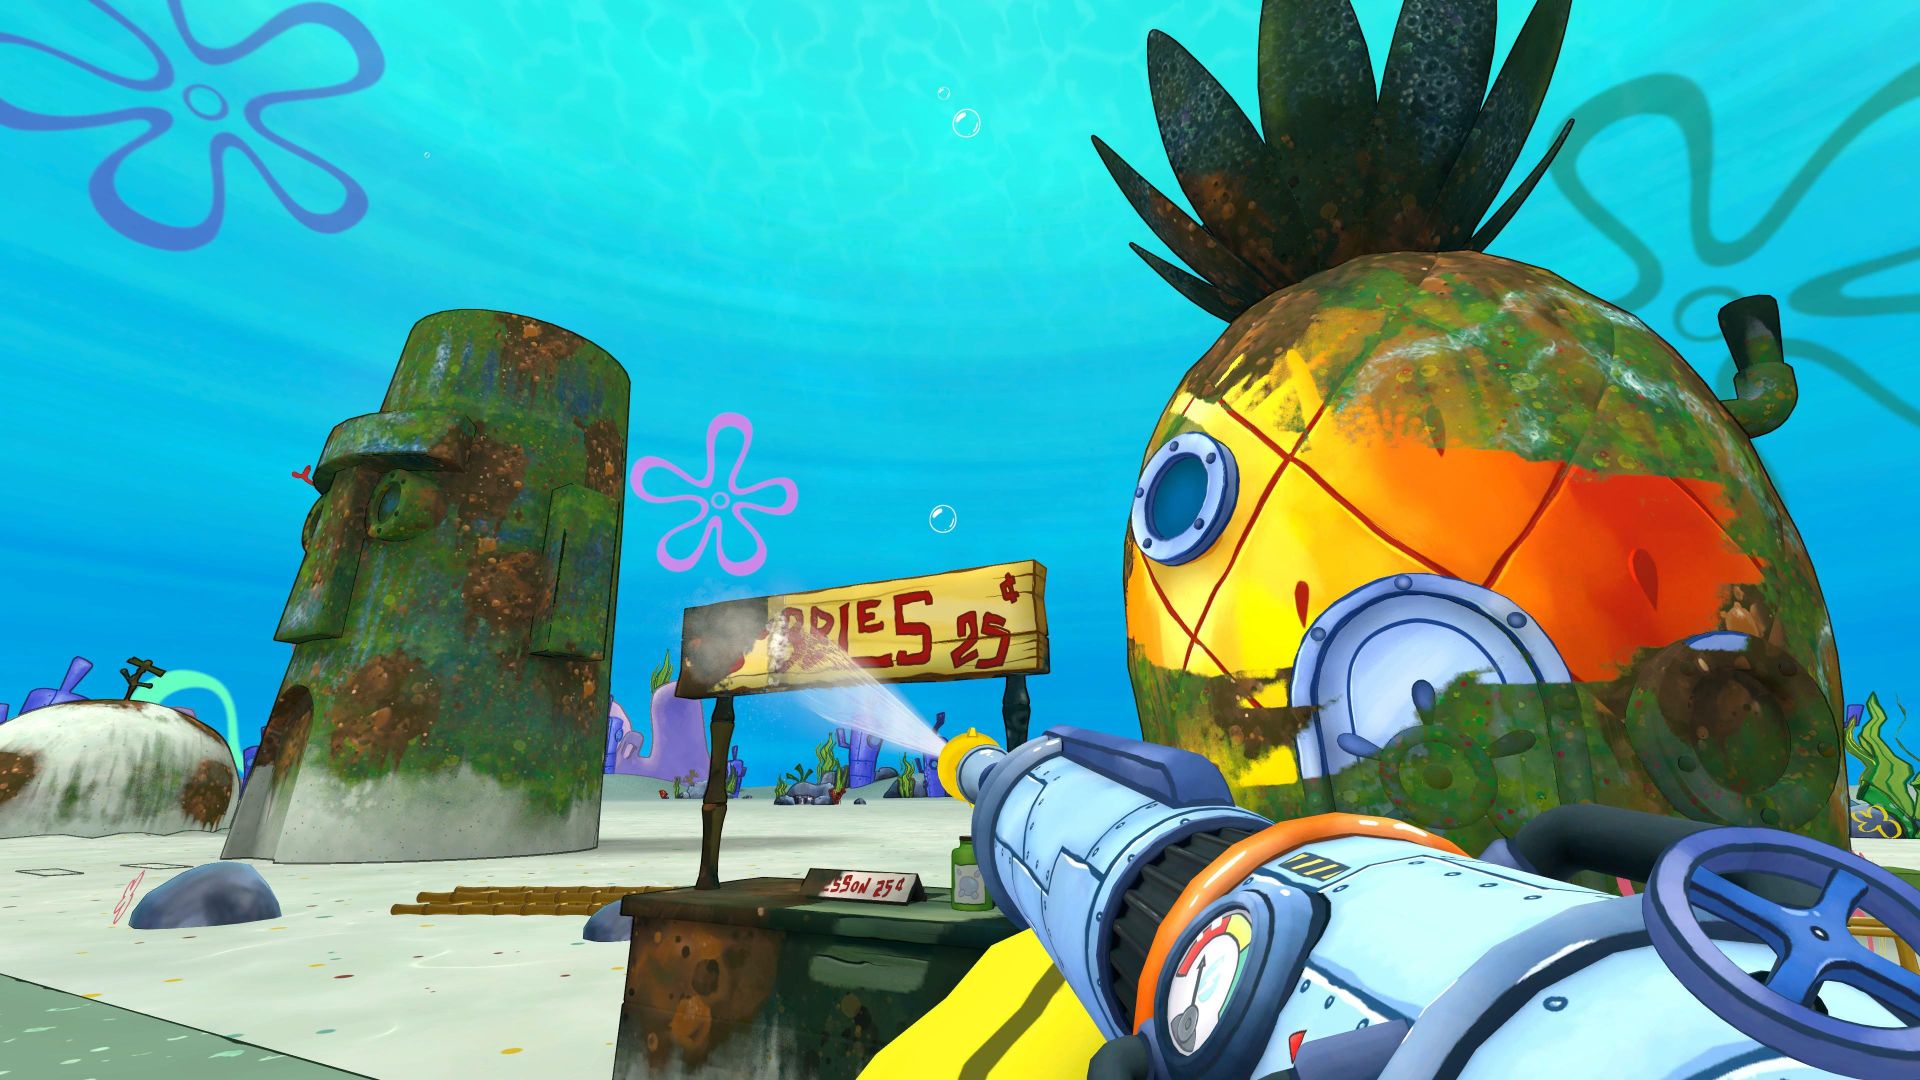 PowerWash Simulator’s New SpongeBob SquarePants DLC is Out Now on PC and Consoles